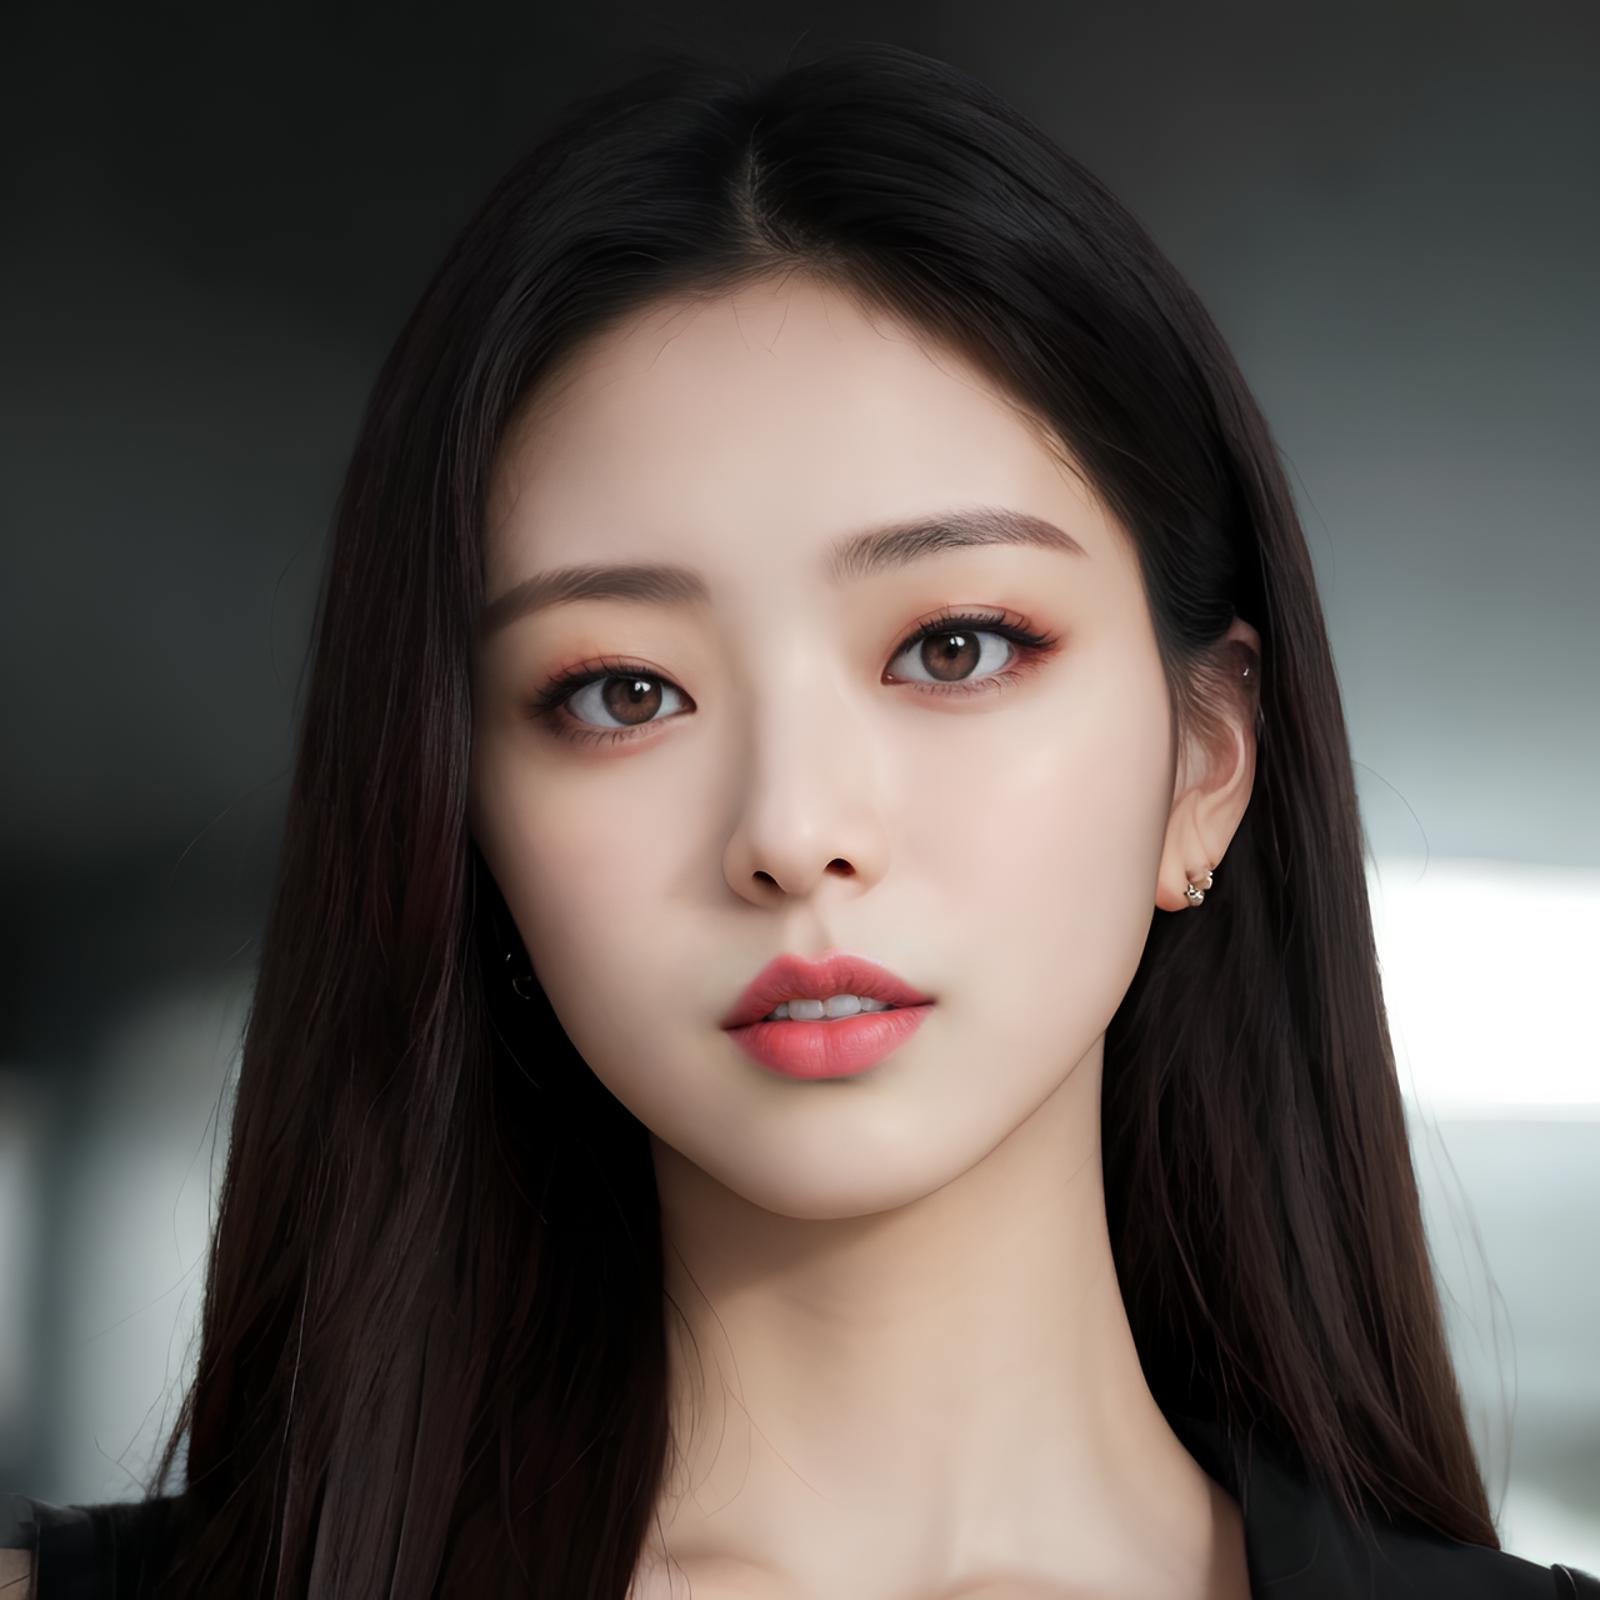 Not Itzy - Yuna image by Tissue_AI